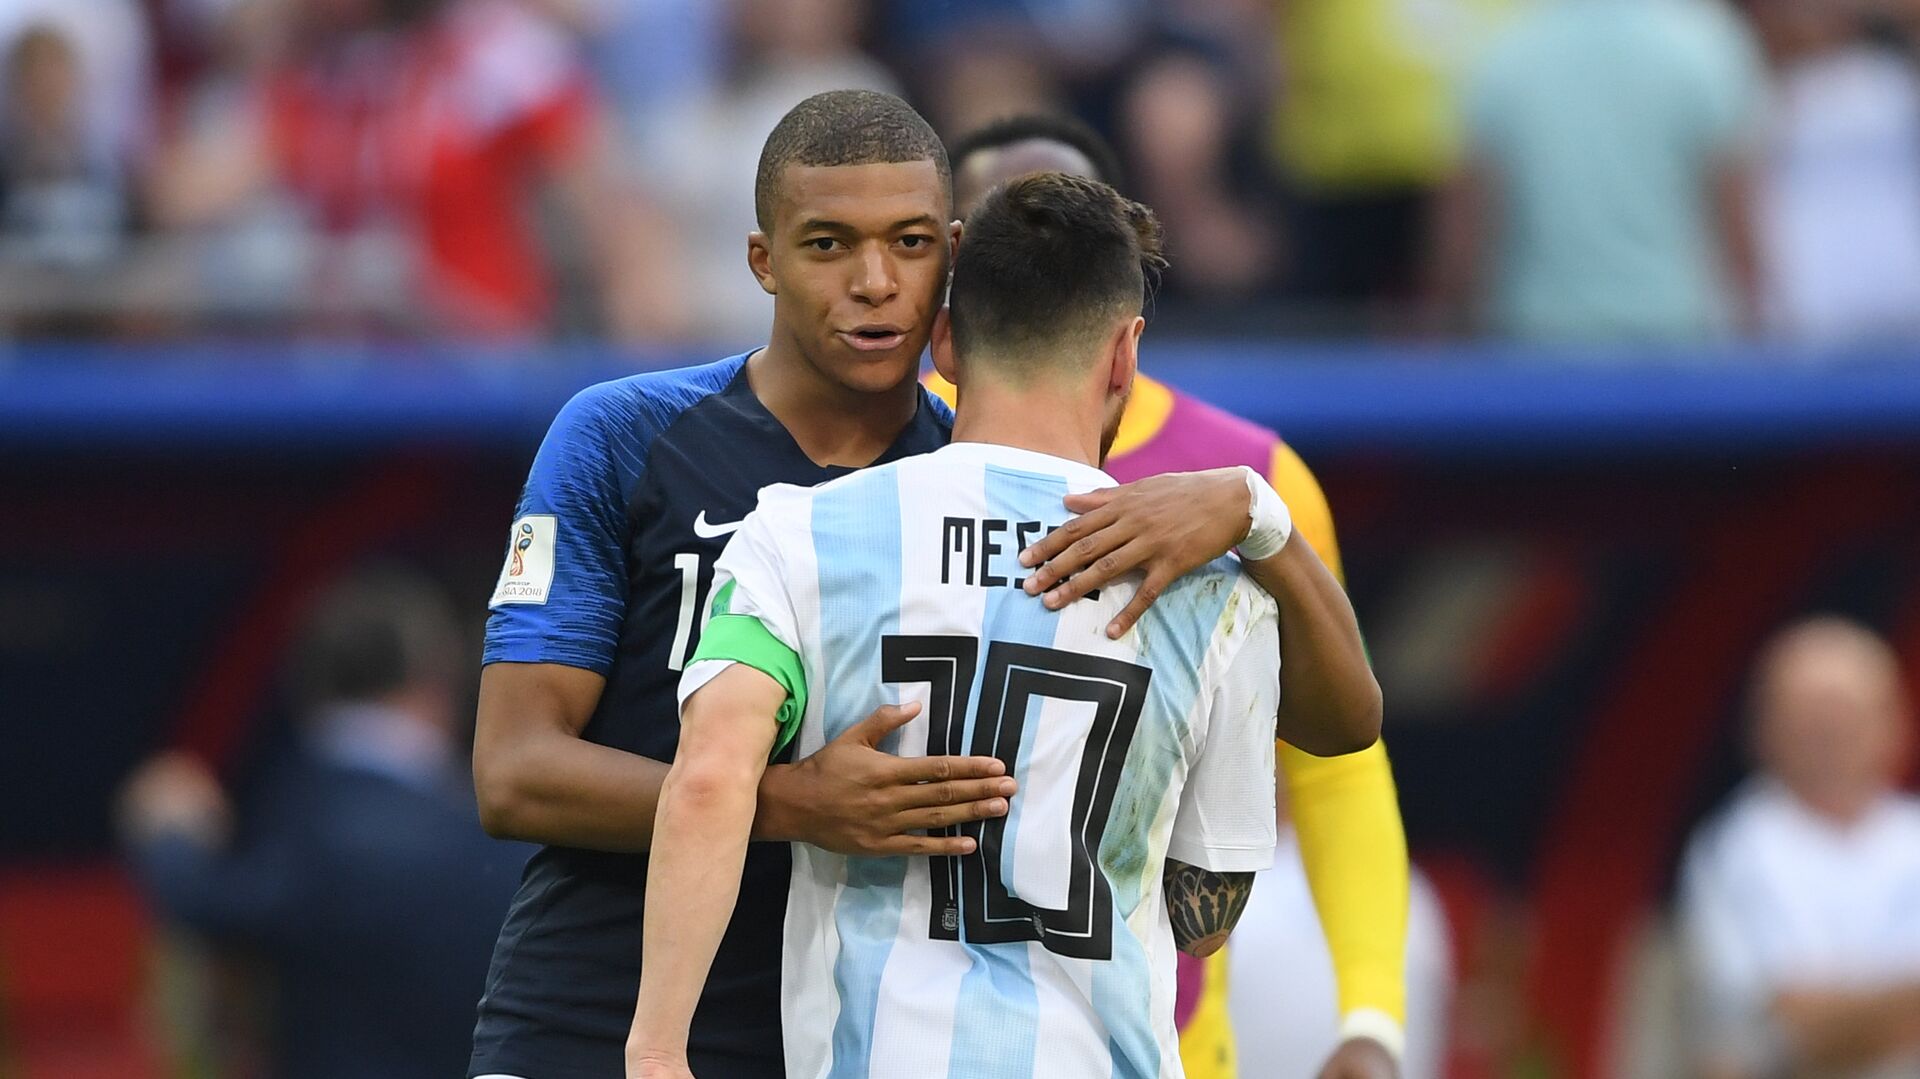 France's Kylian Mbappe, left, comforts Argentina's Lionel Messi after France's 4:3 victory in the World Cup Round of 16 soccer match between France and Argentina, at the Kazan Arena, in Kazan, Russia, June 30, 2018 - Sputnik International, 1920, 01.02.2022